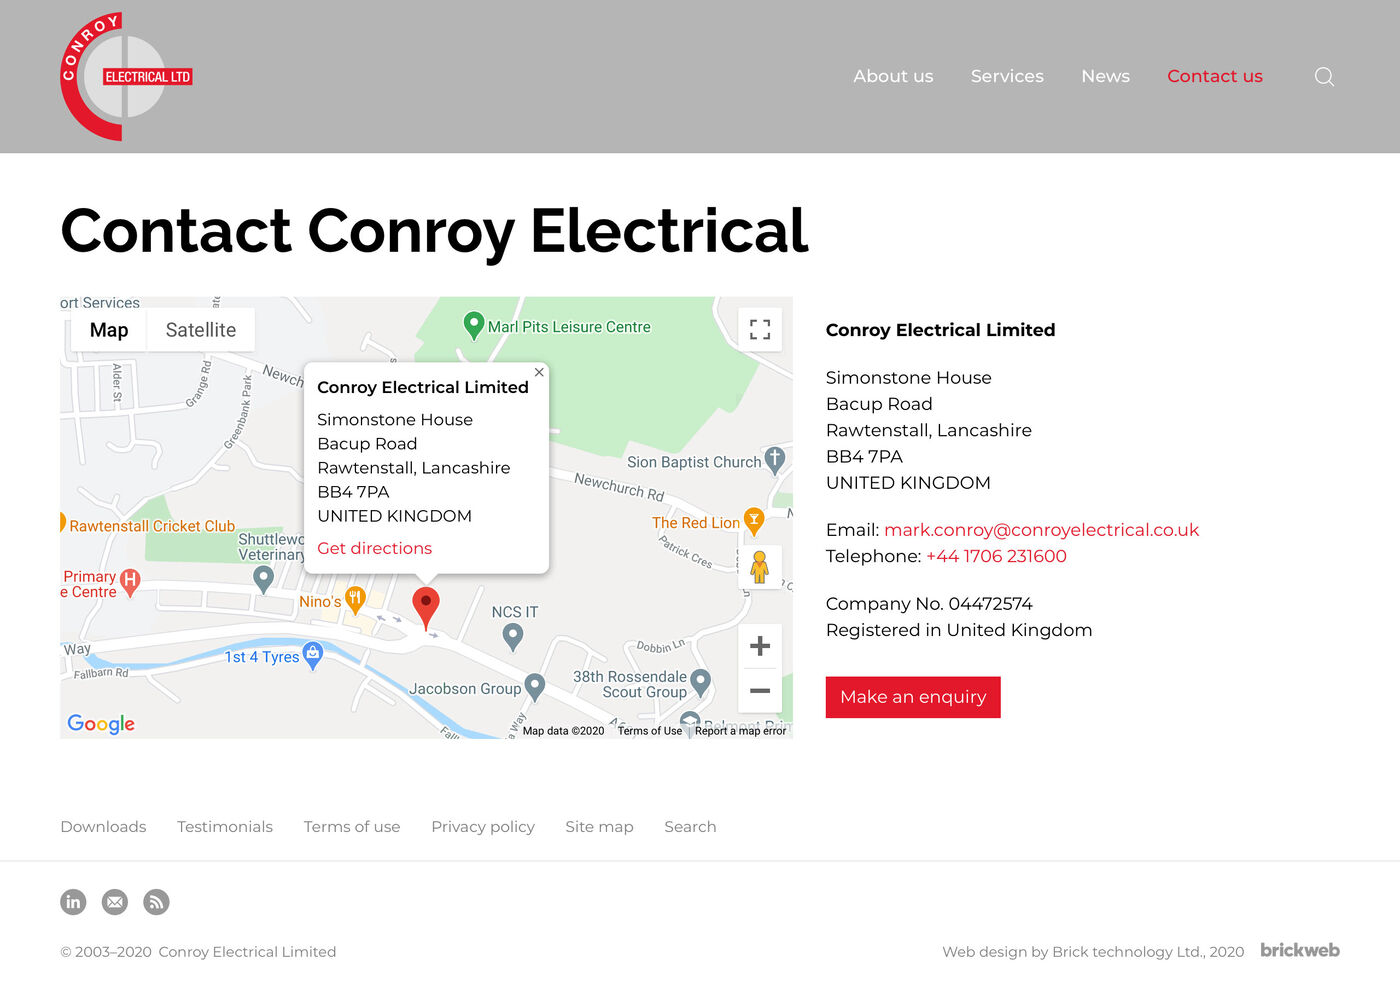 Conroy Electrical Limited Contact us